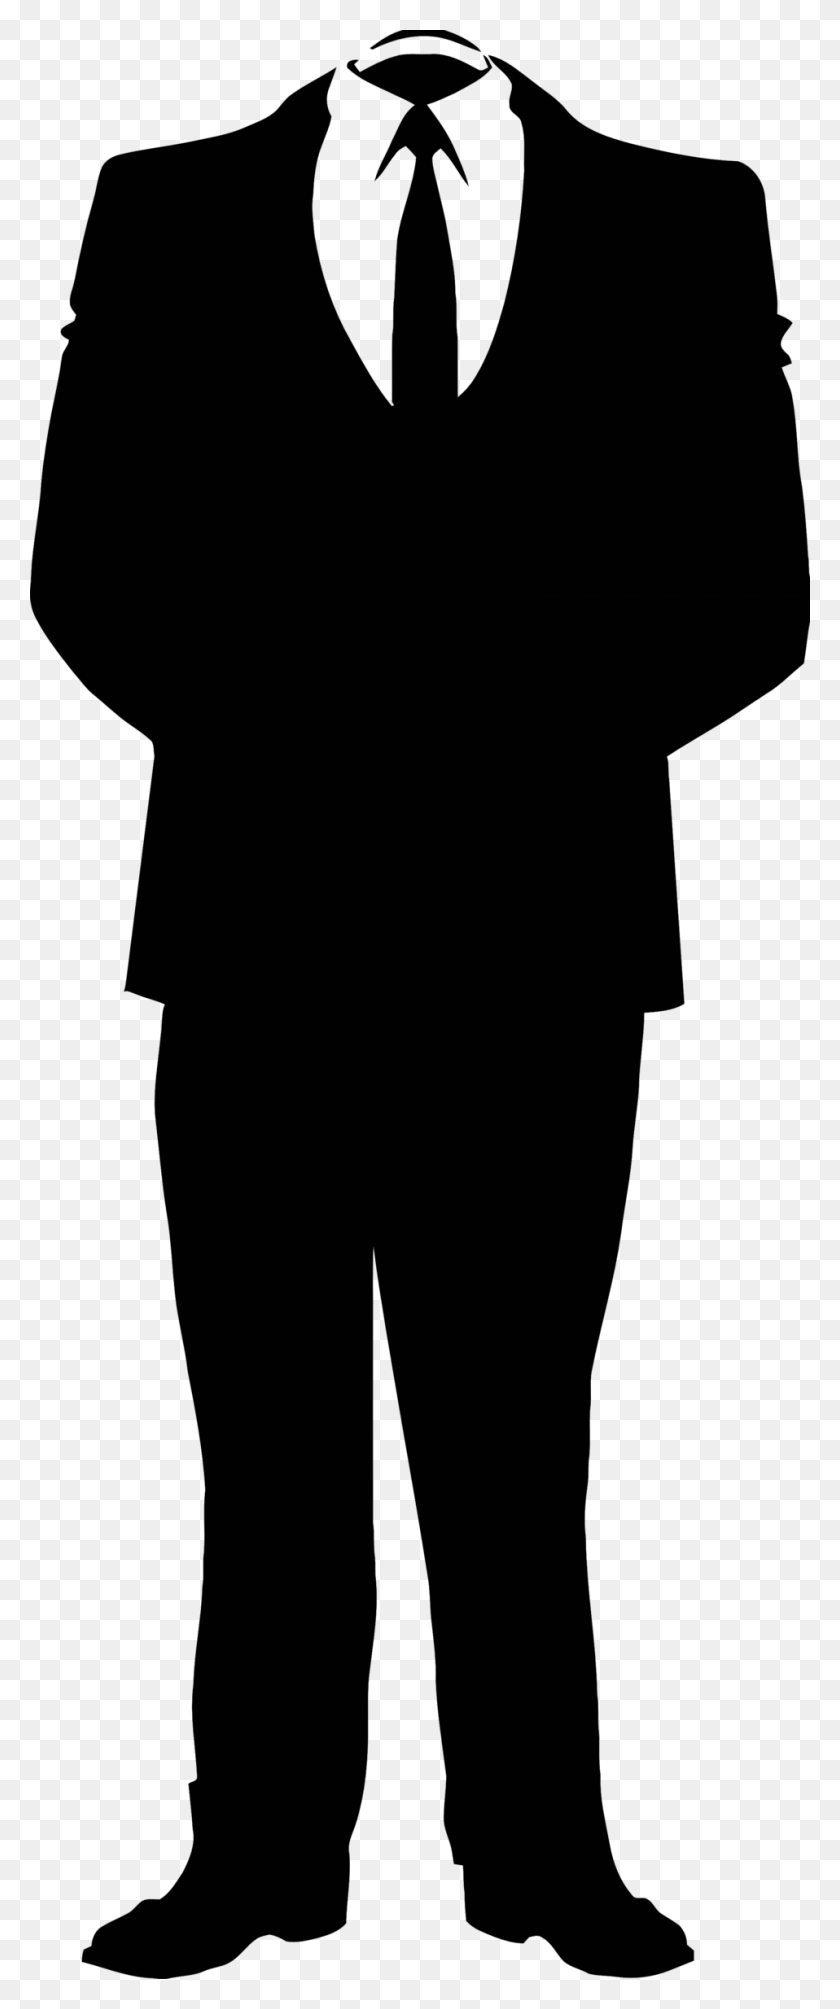 958x2394 Groom Clipart Suited Man - Groom Clipart